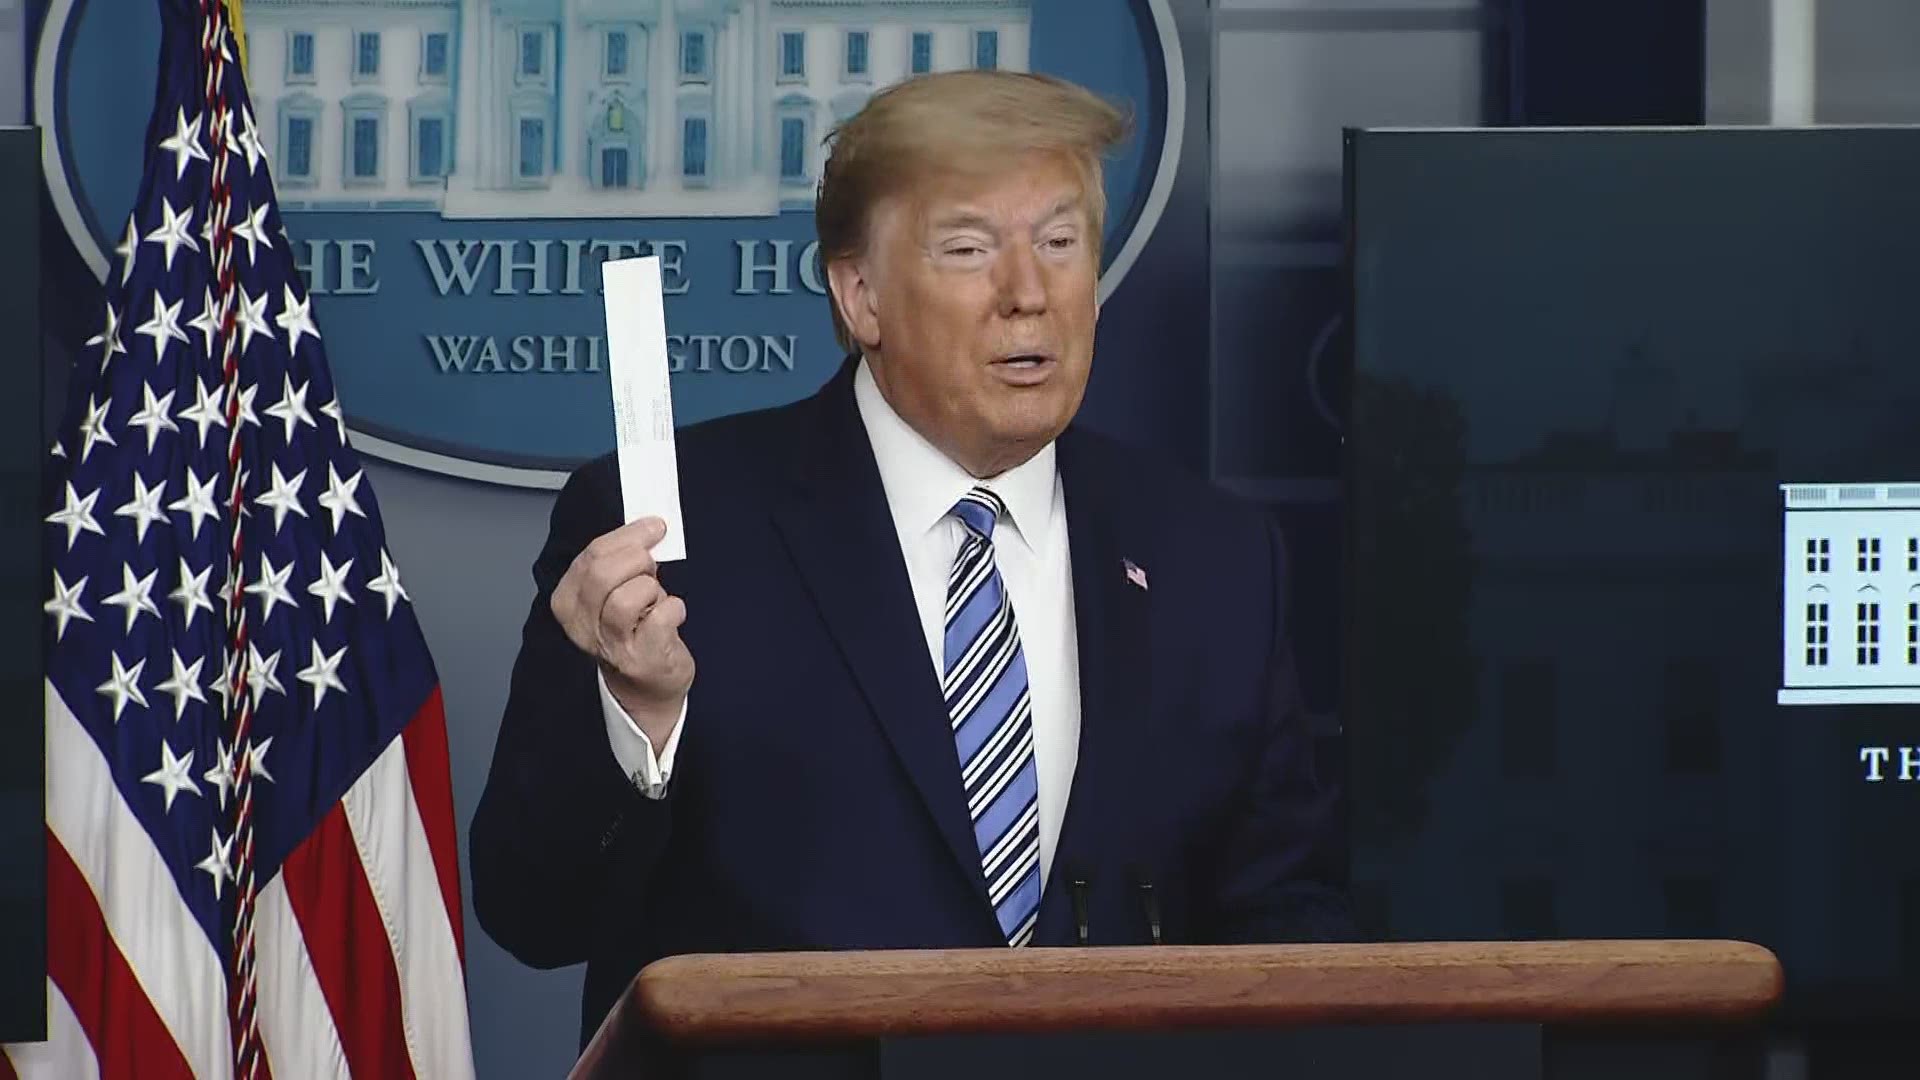 Taking it from his coat pocket, President Trump on Sunday displayed the swab used for coronavirus testing.